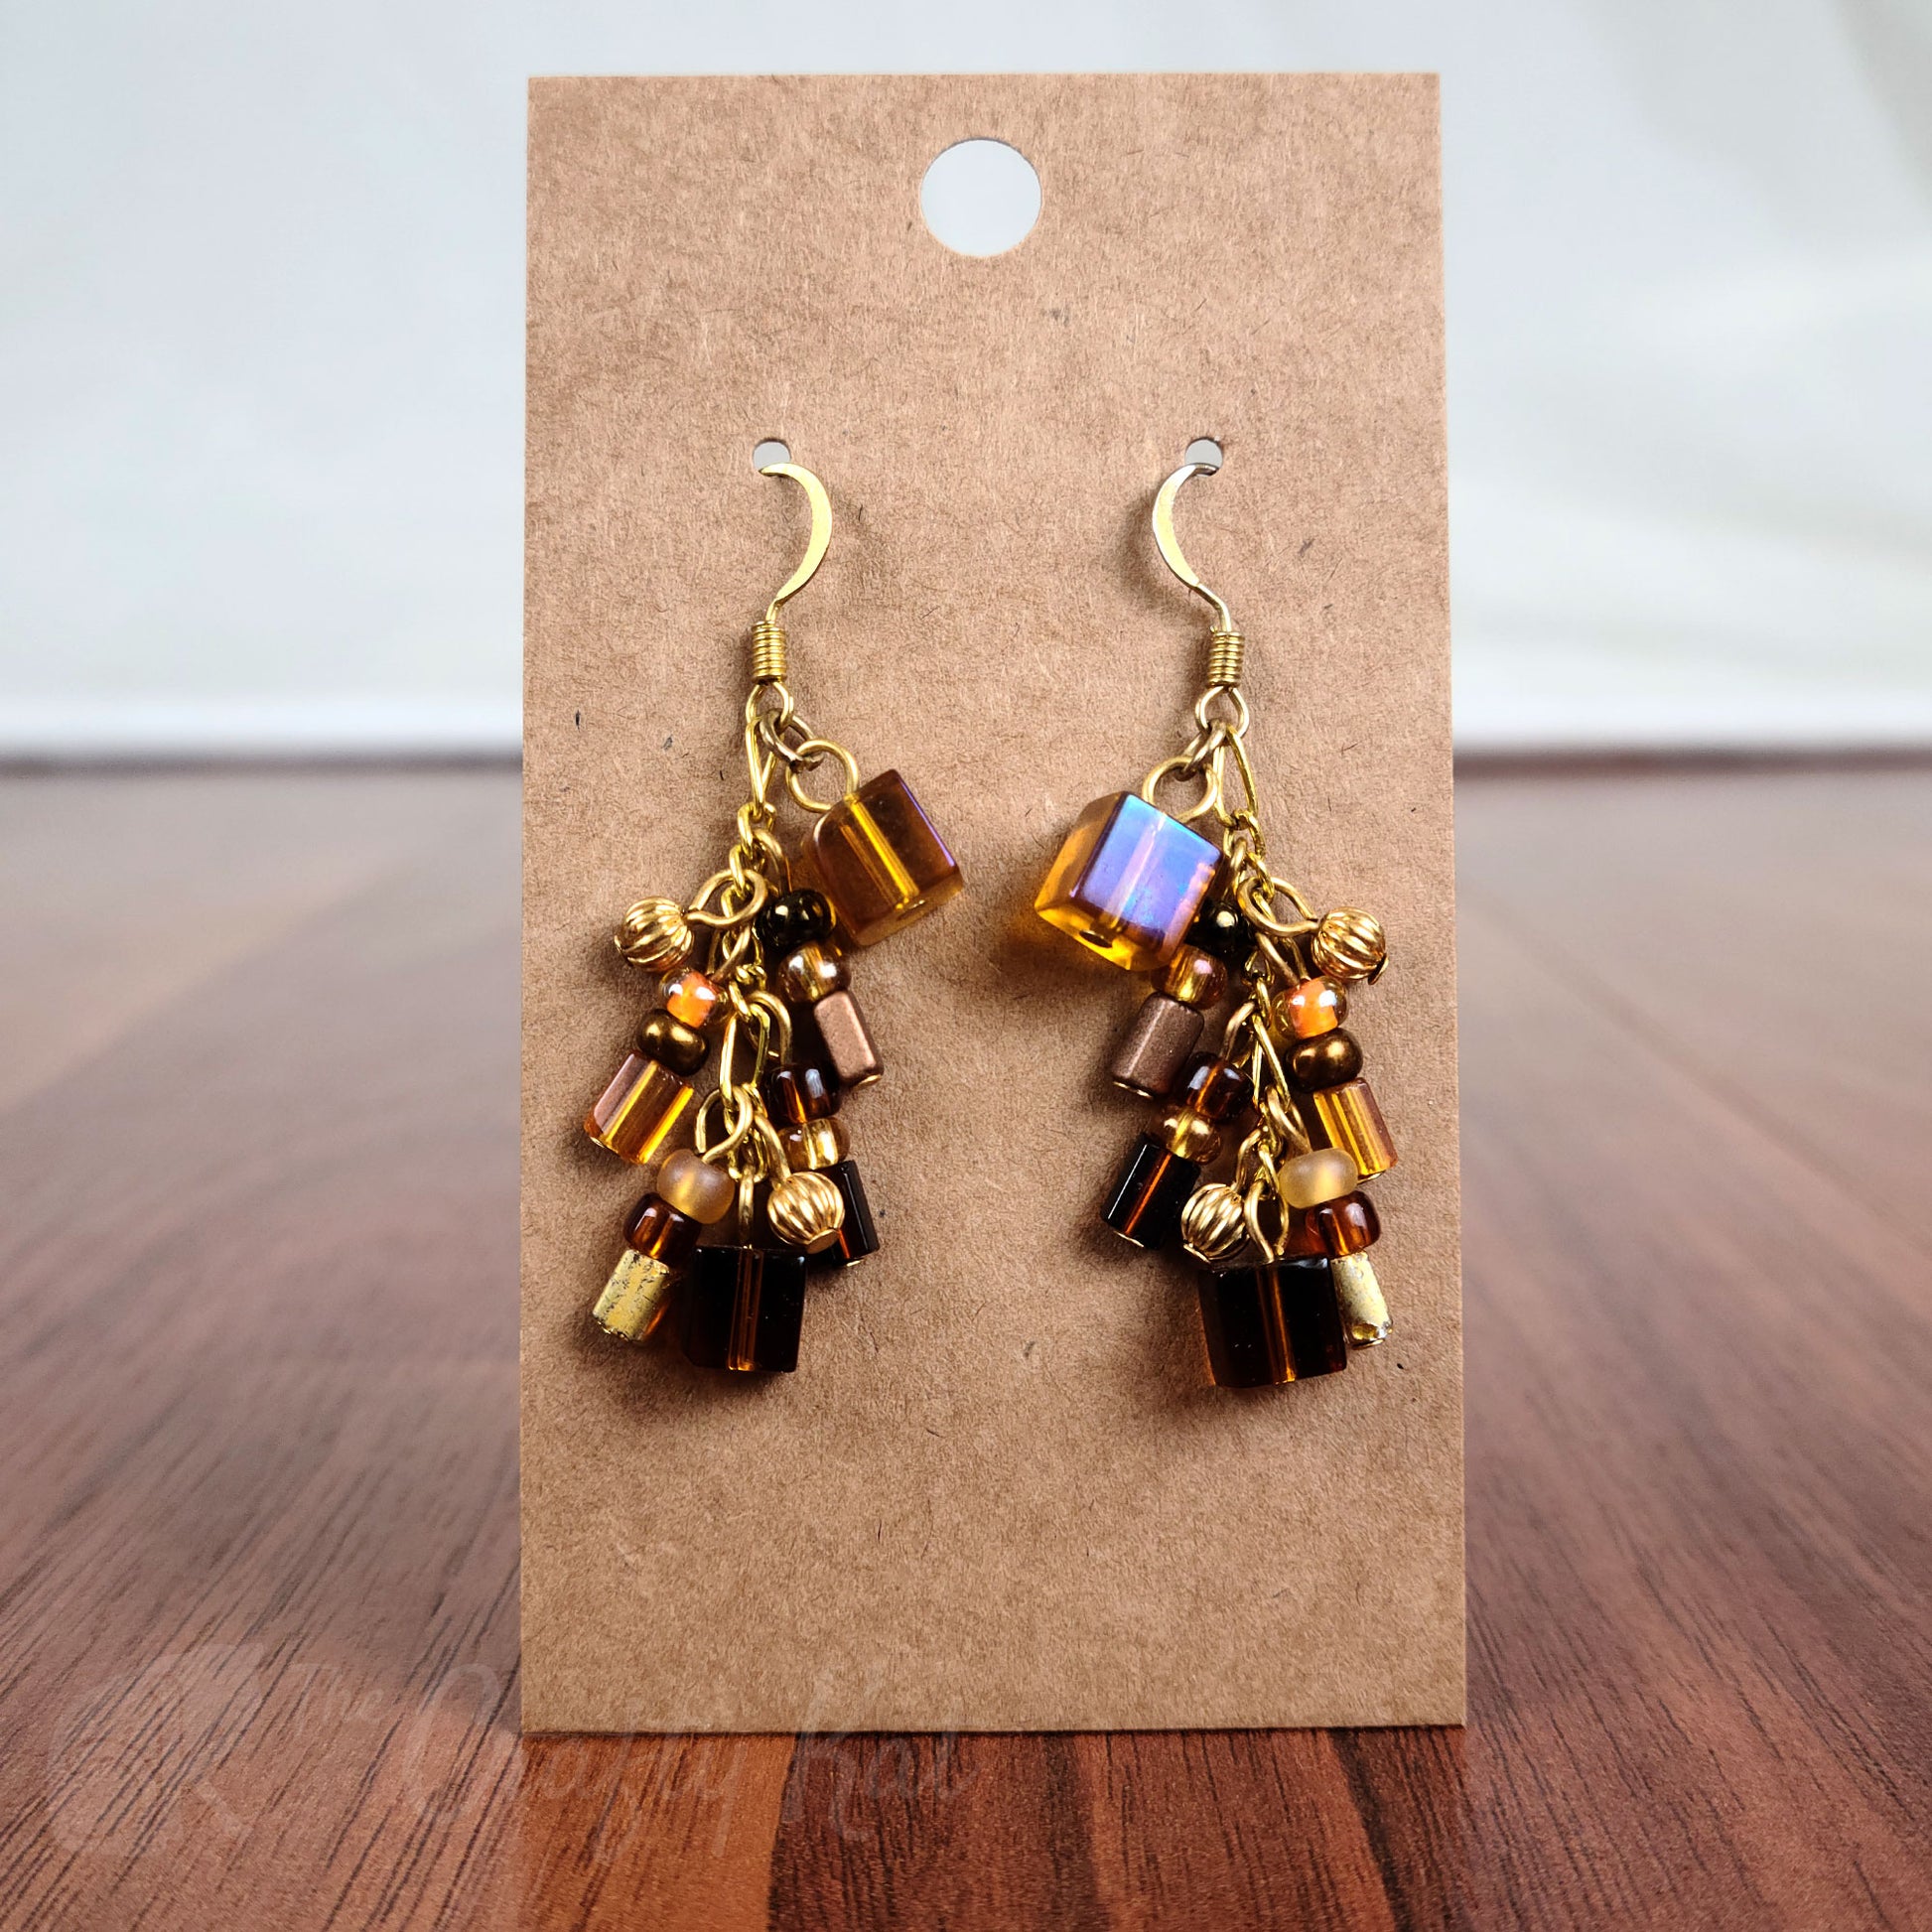 Cascading earrings made of gold, amber, and brown glass beads with gold beads and fittings